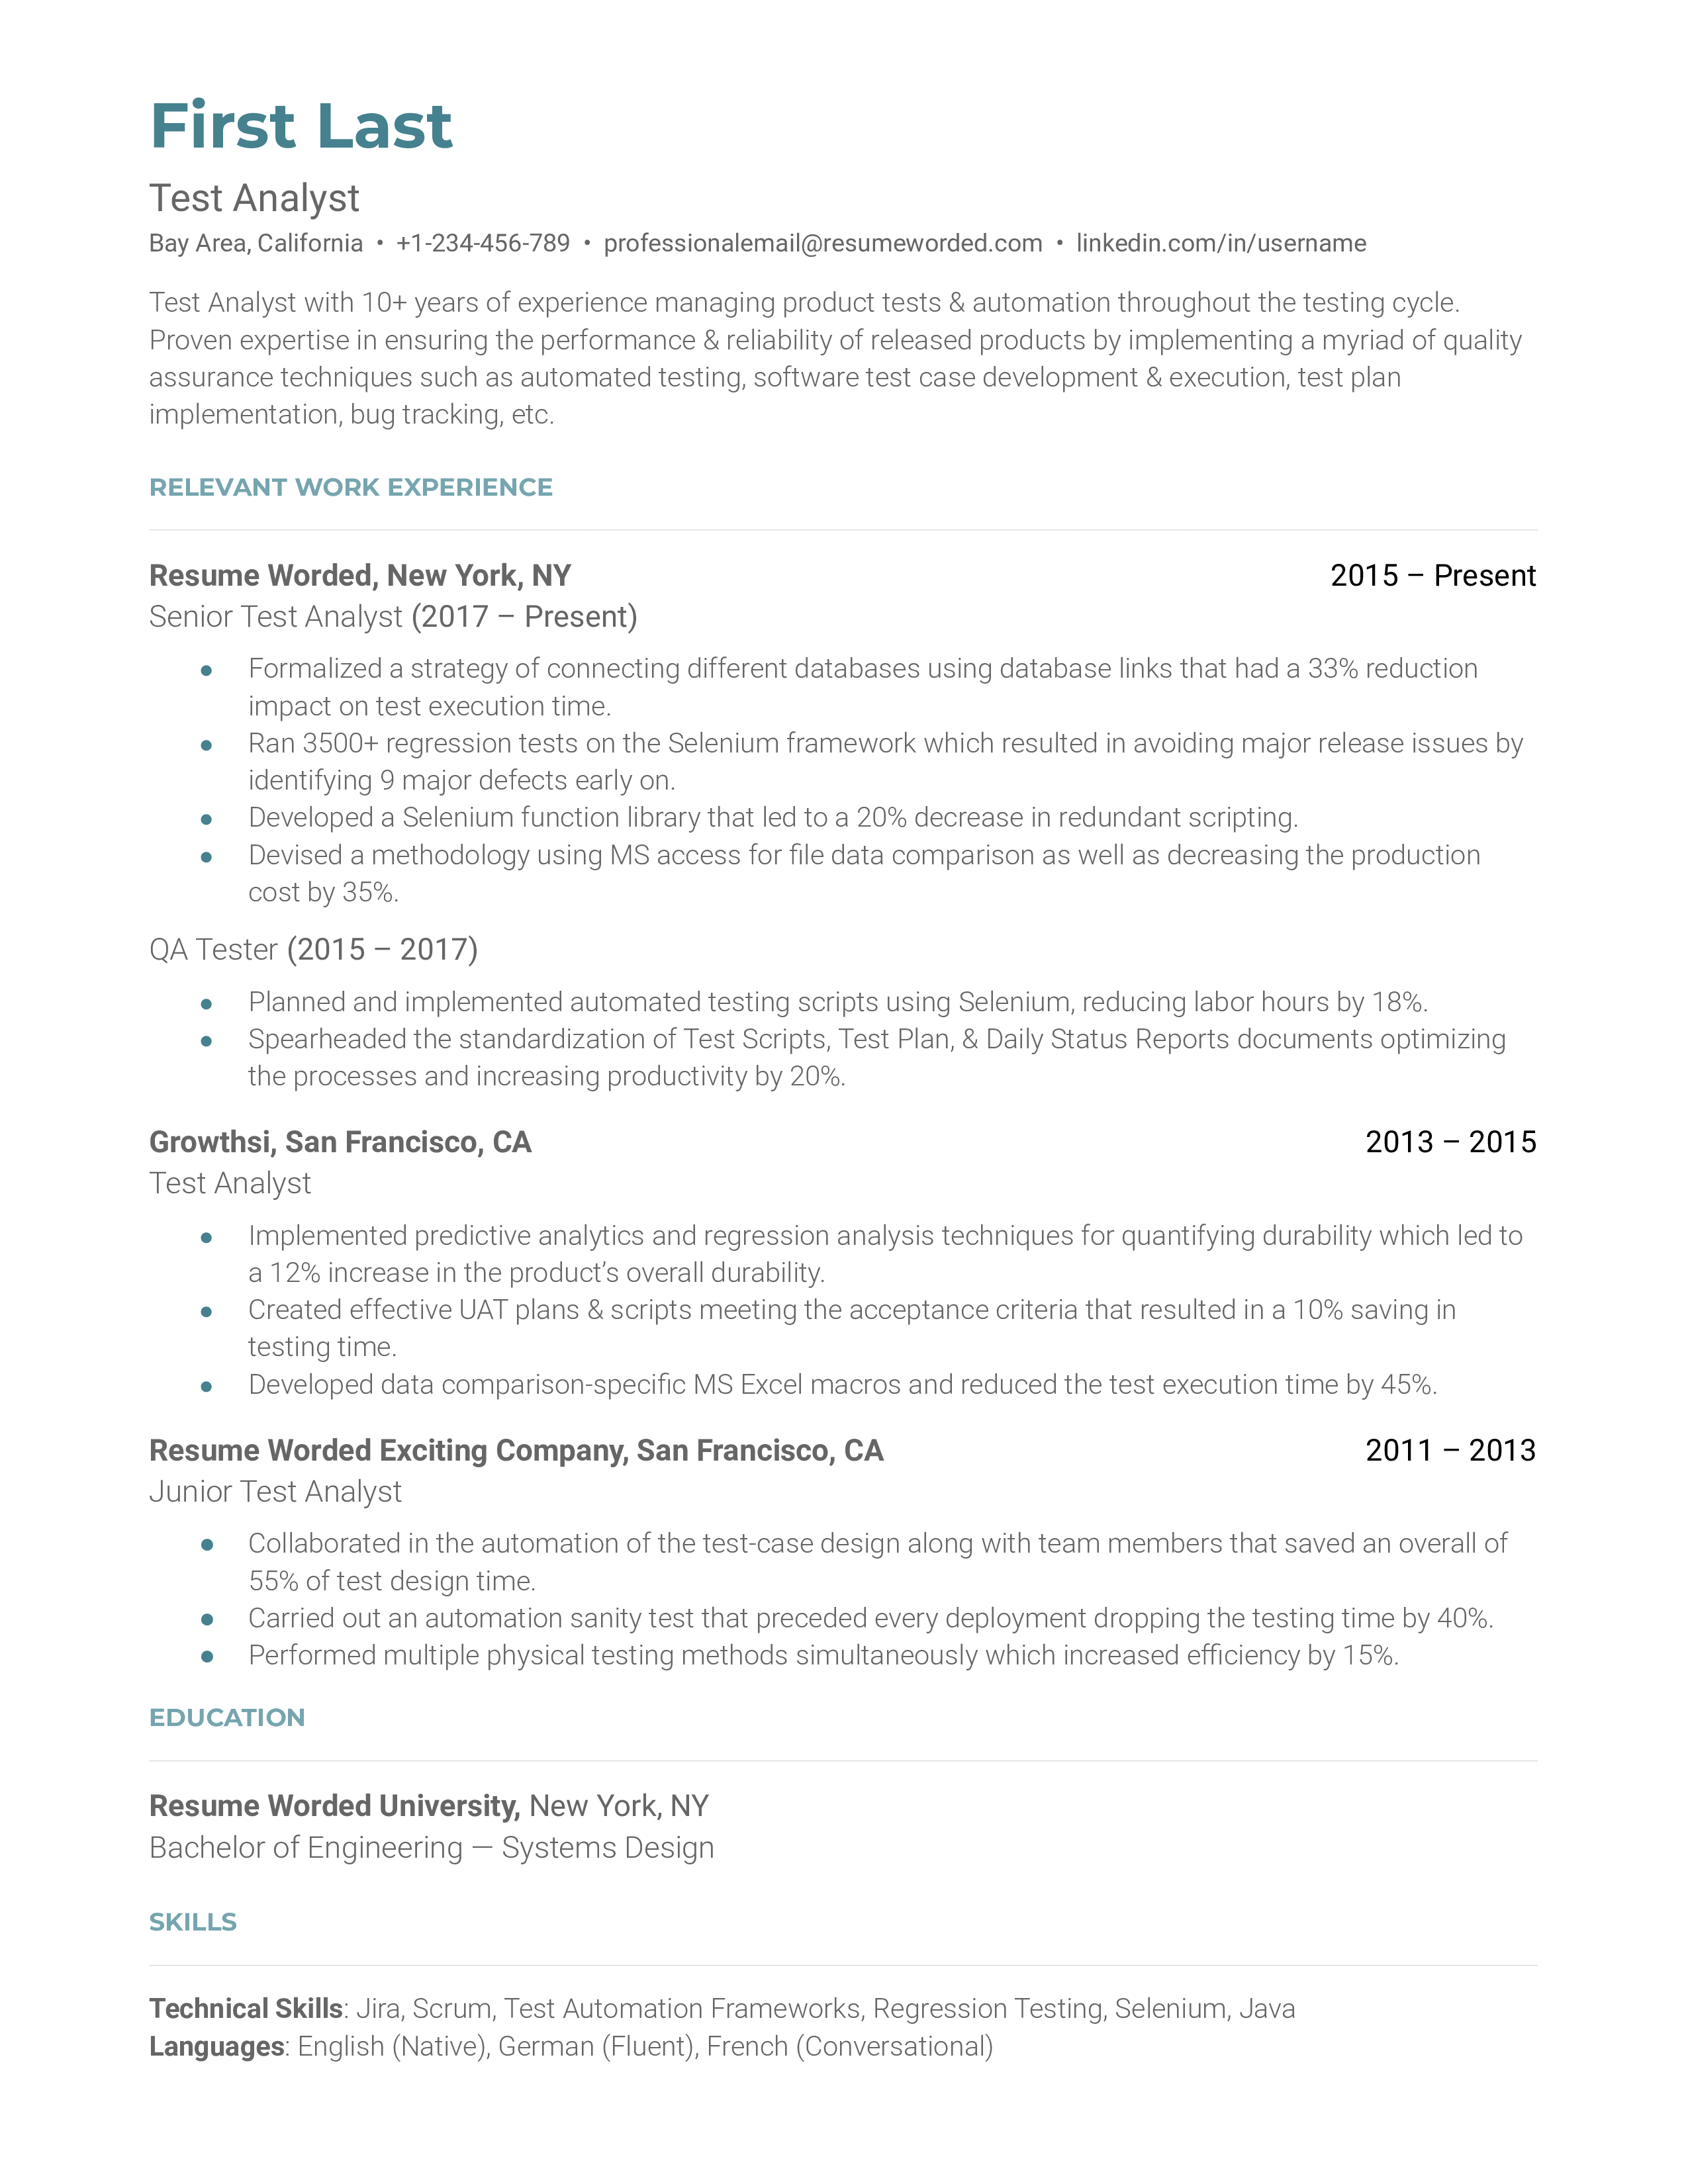 Test analust sample resume that highlights the applicant's value addition and management experience